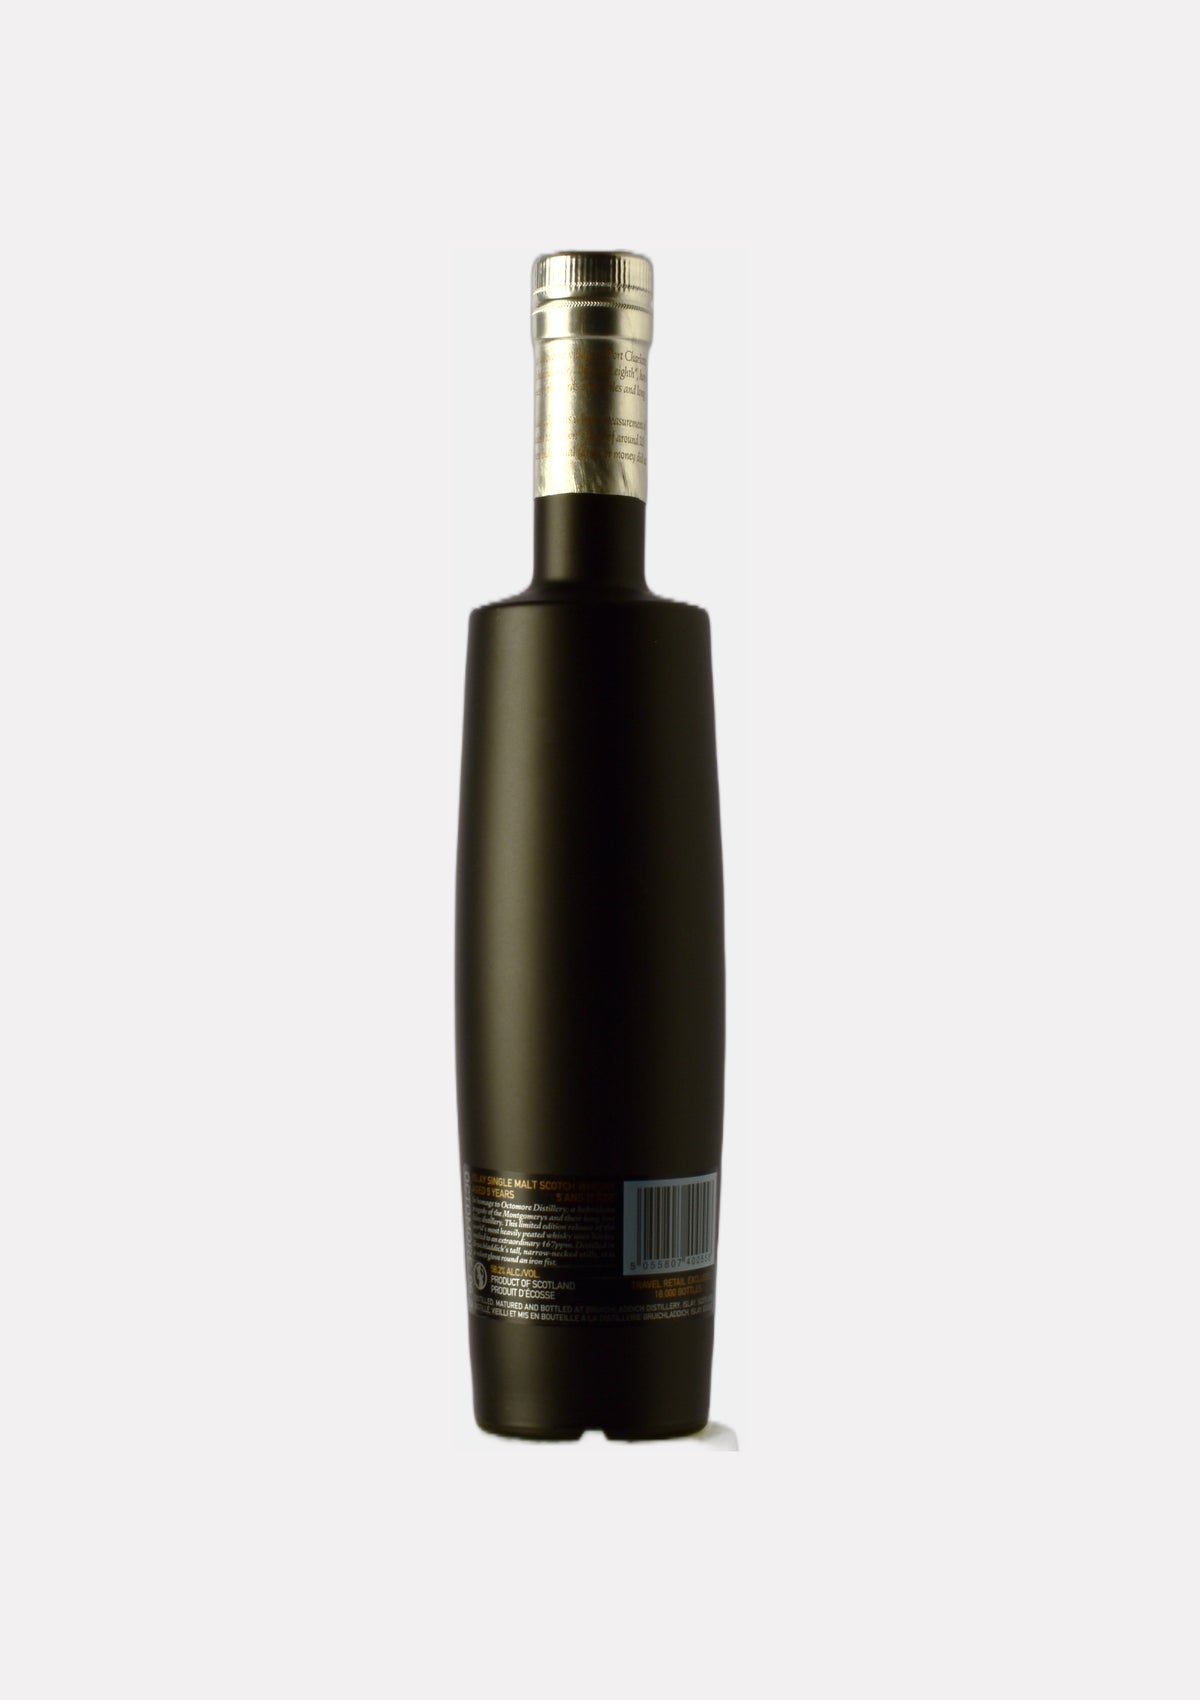 Octomore 06.2 167 ppm